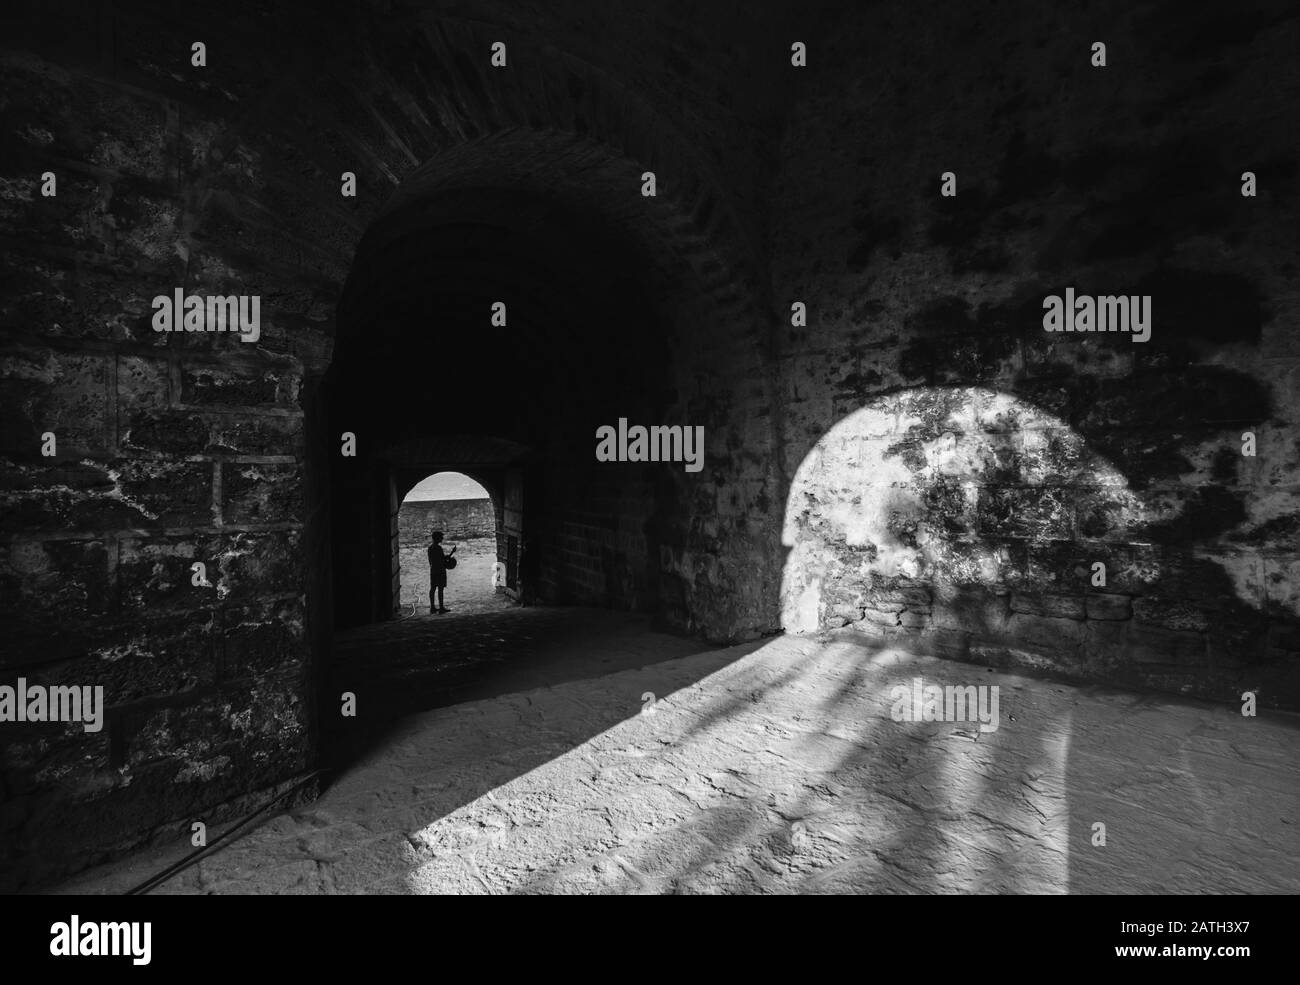 Diu, India - December 2018: A grayscale image of the light falling on the walls through the geometric arches of the ancient Portuguese built Diu fort Stock Photo